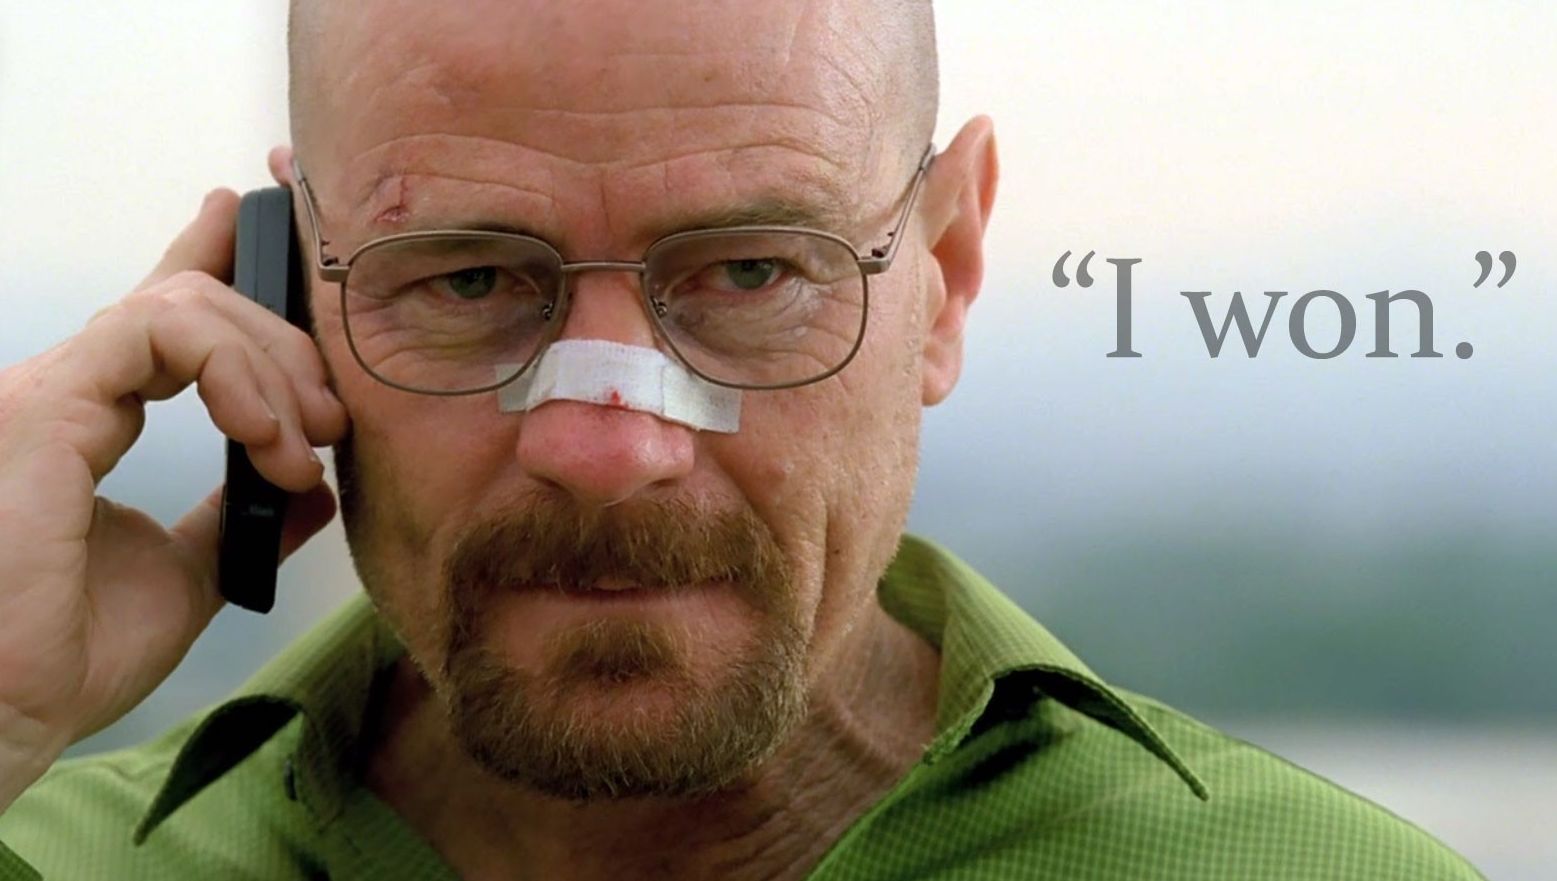 Walter White on the phone - &quot;I won.&quot;